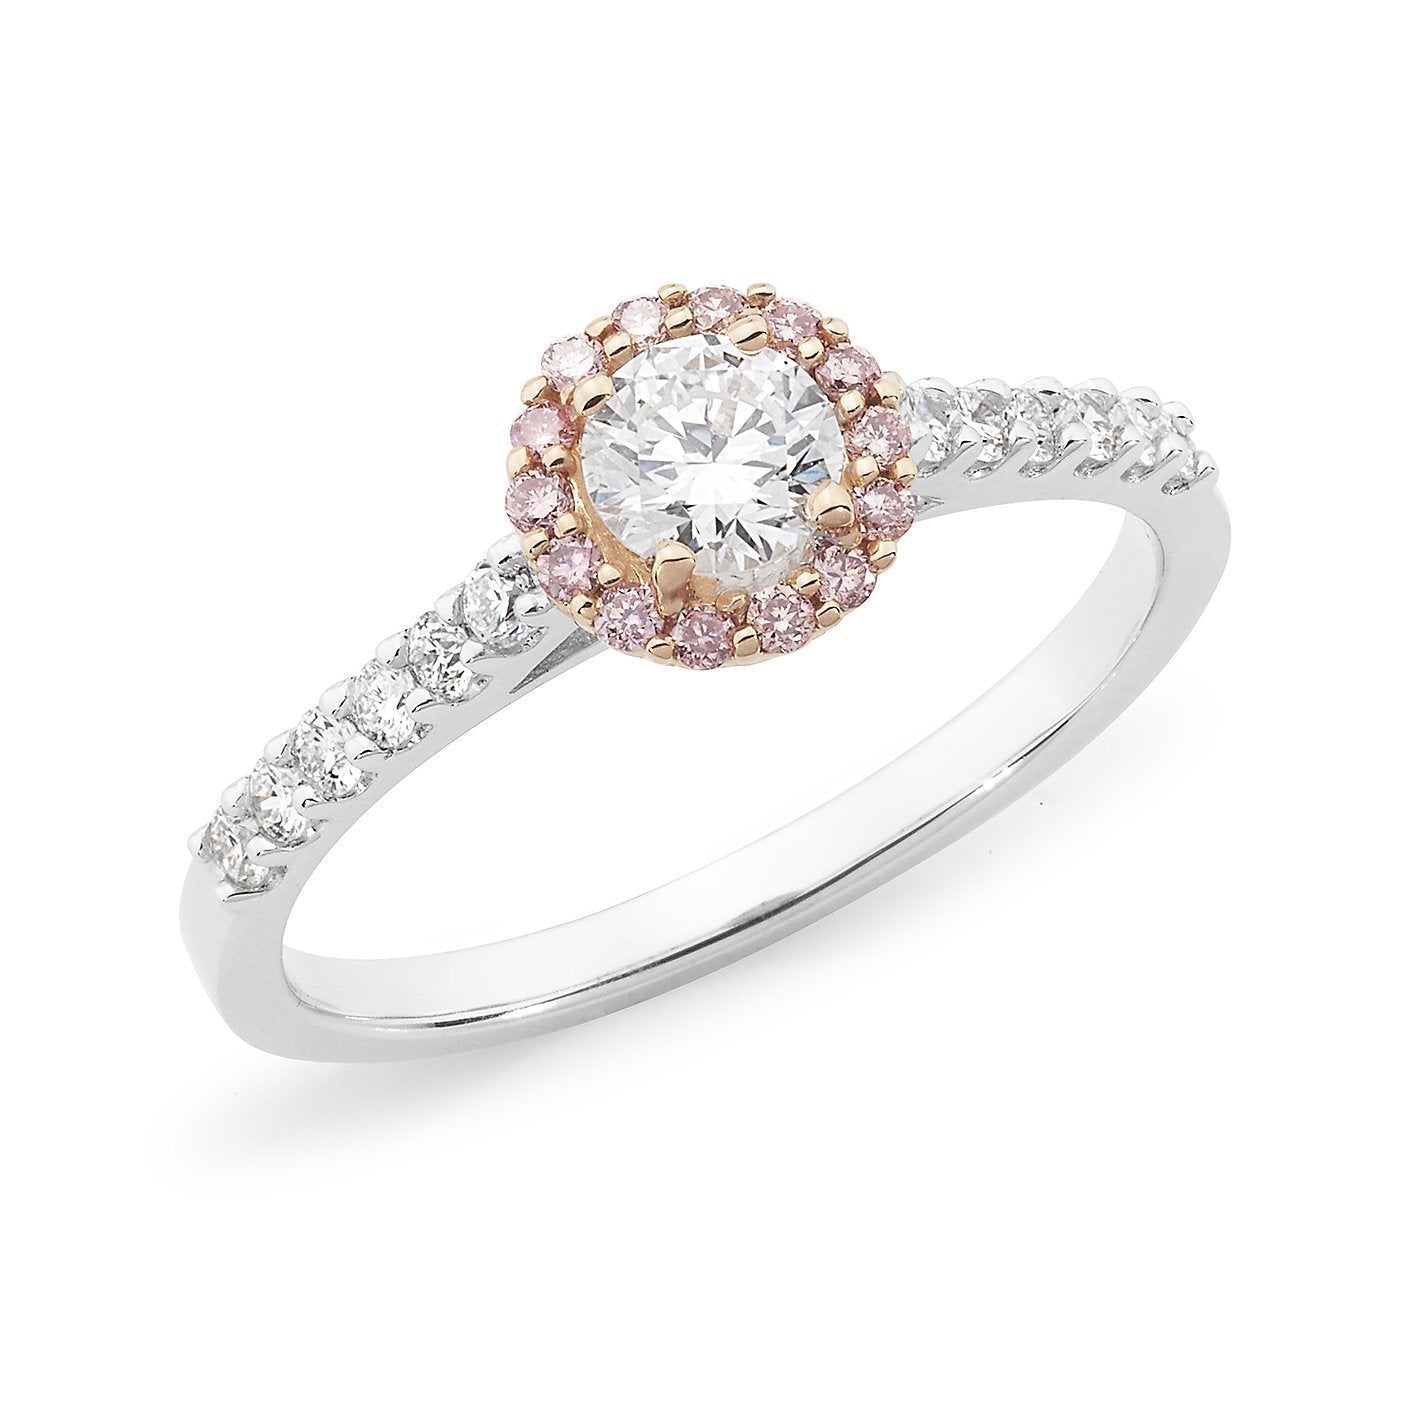 PINK CAVIAR 0.615ct White Round Brilliant Cut & Pink Diamond Halo Engagement Ring in 18ct White Gold